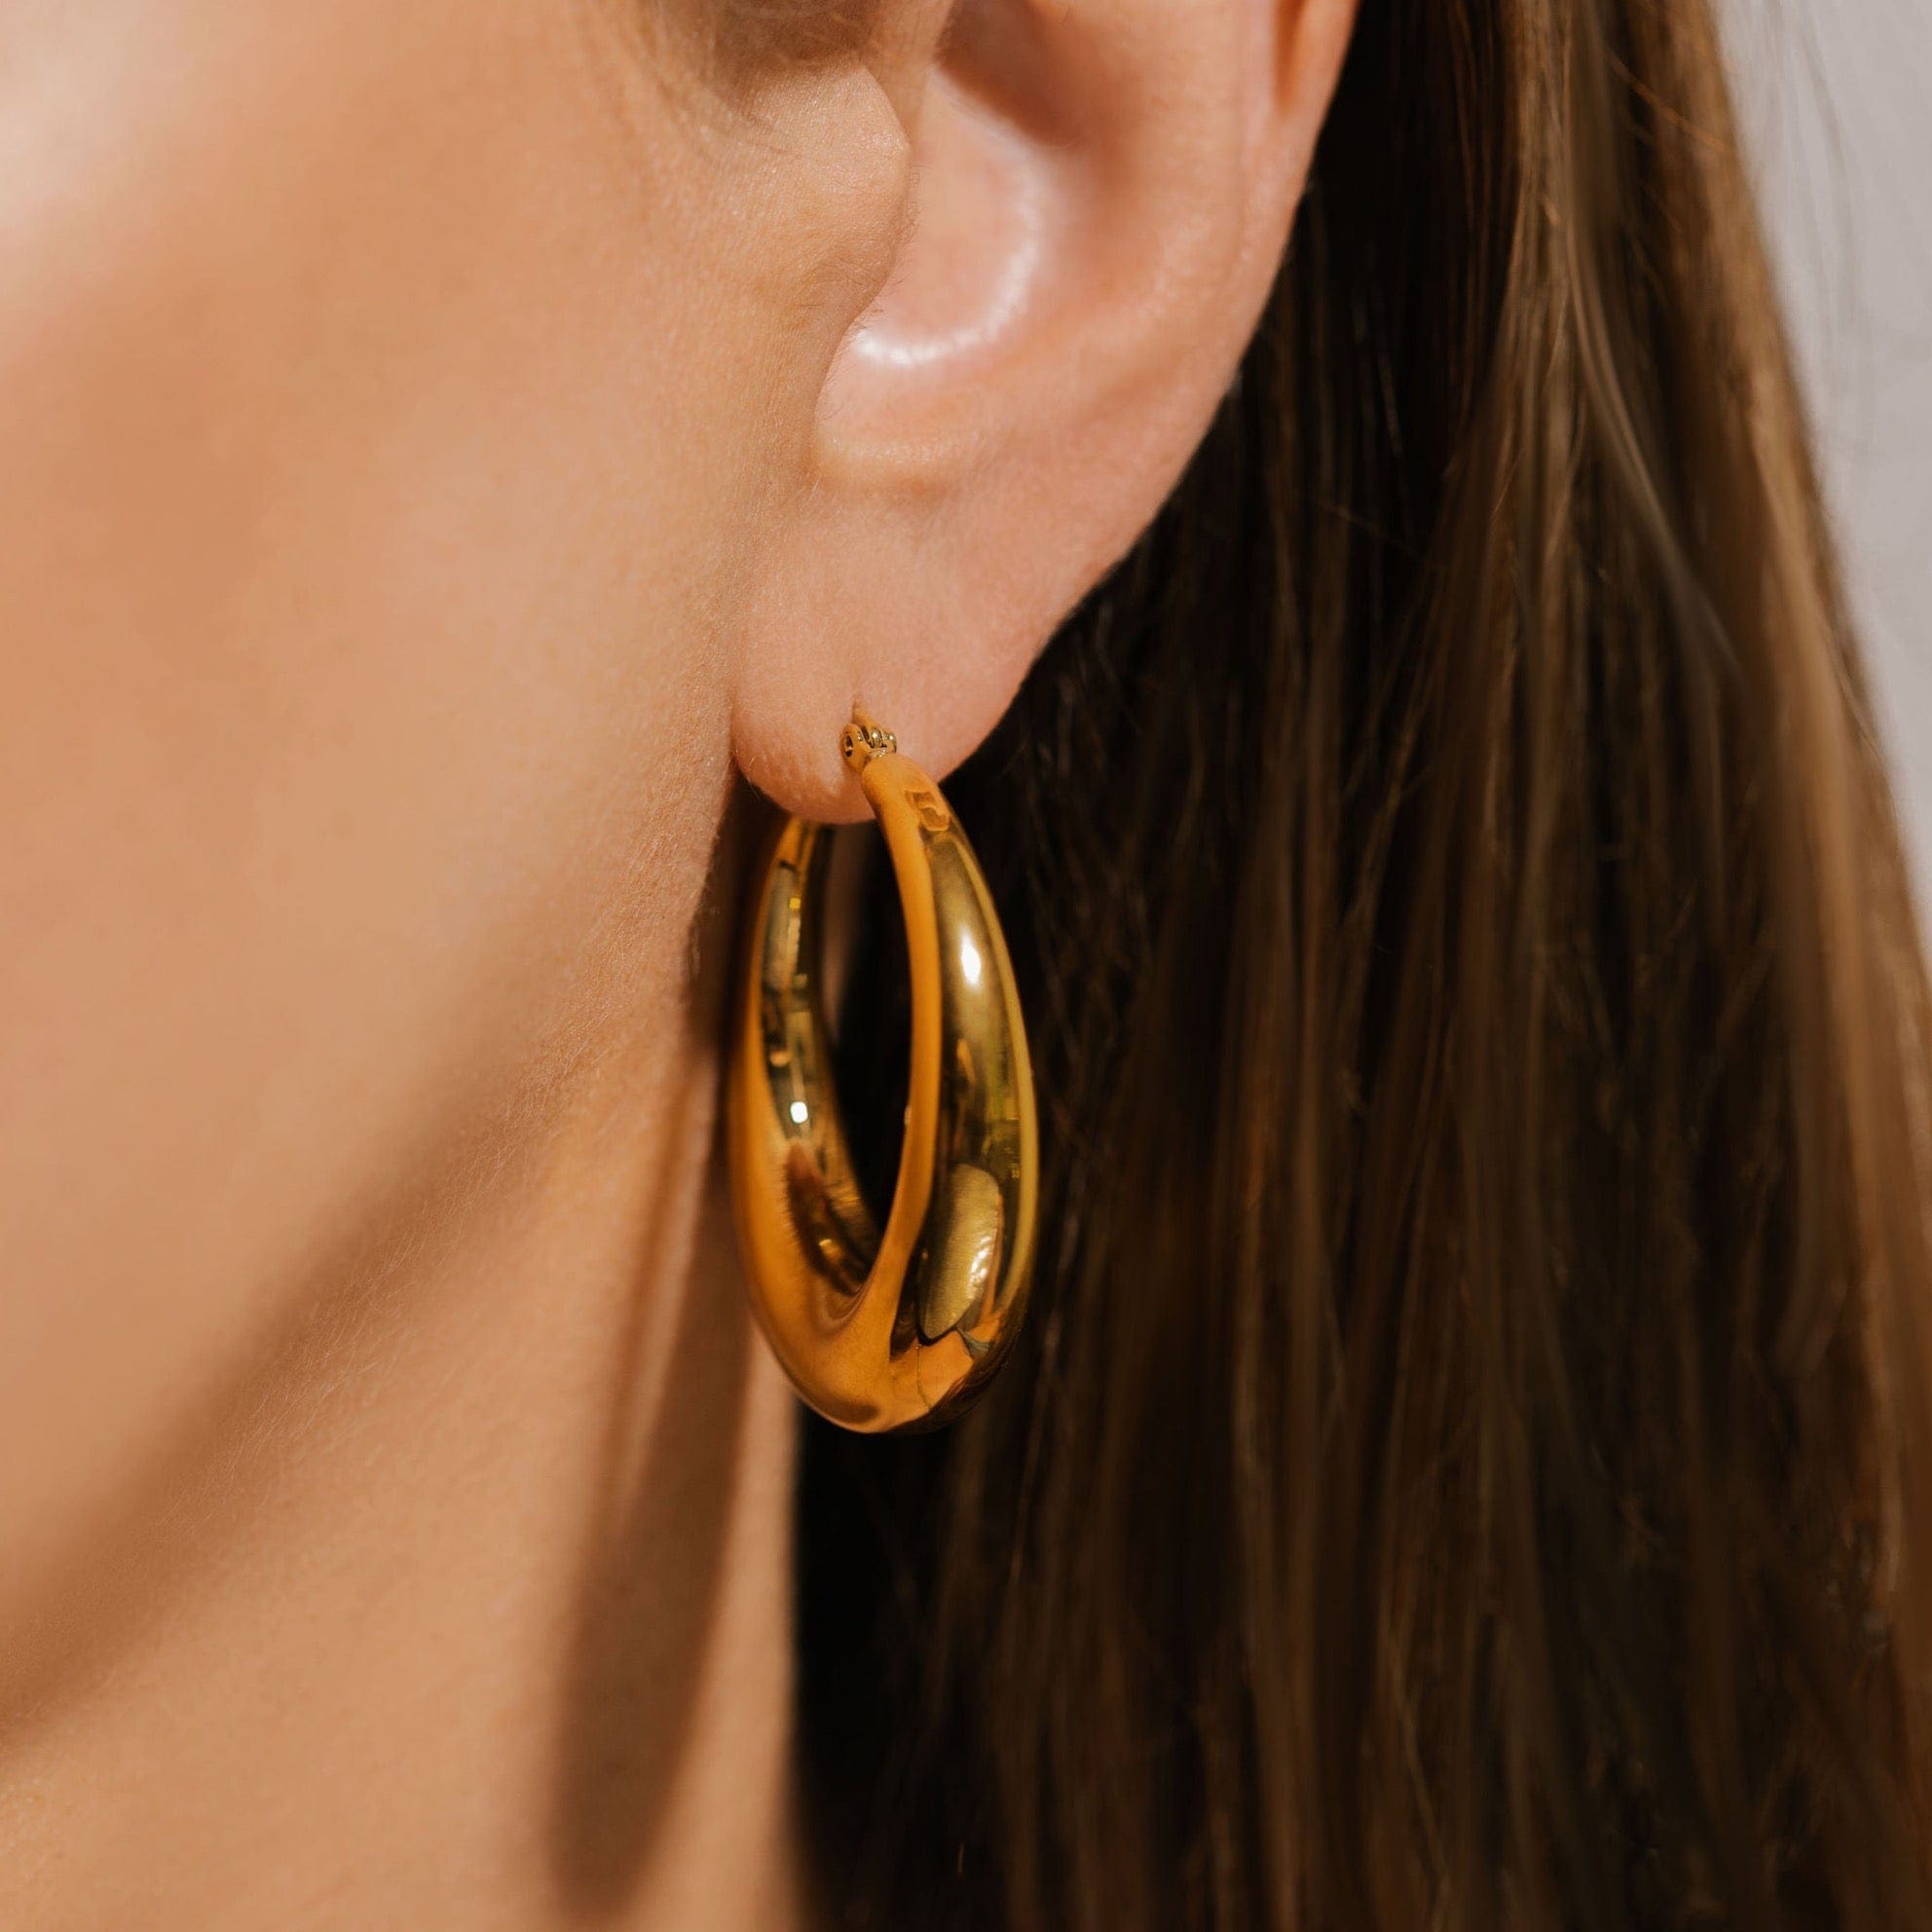 The bold face of the Capri Hoop Grande glistens and reflects the room in a close-up view of the earing on the model's ear. 